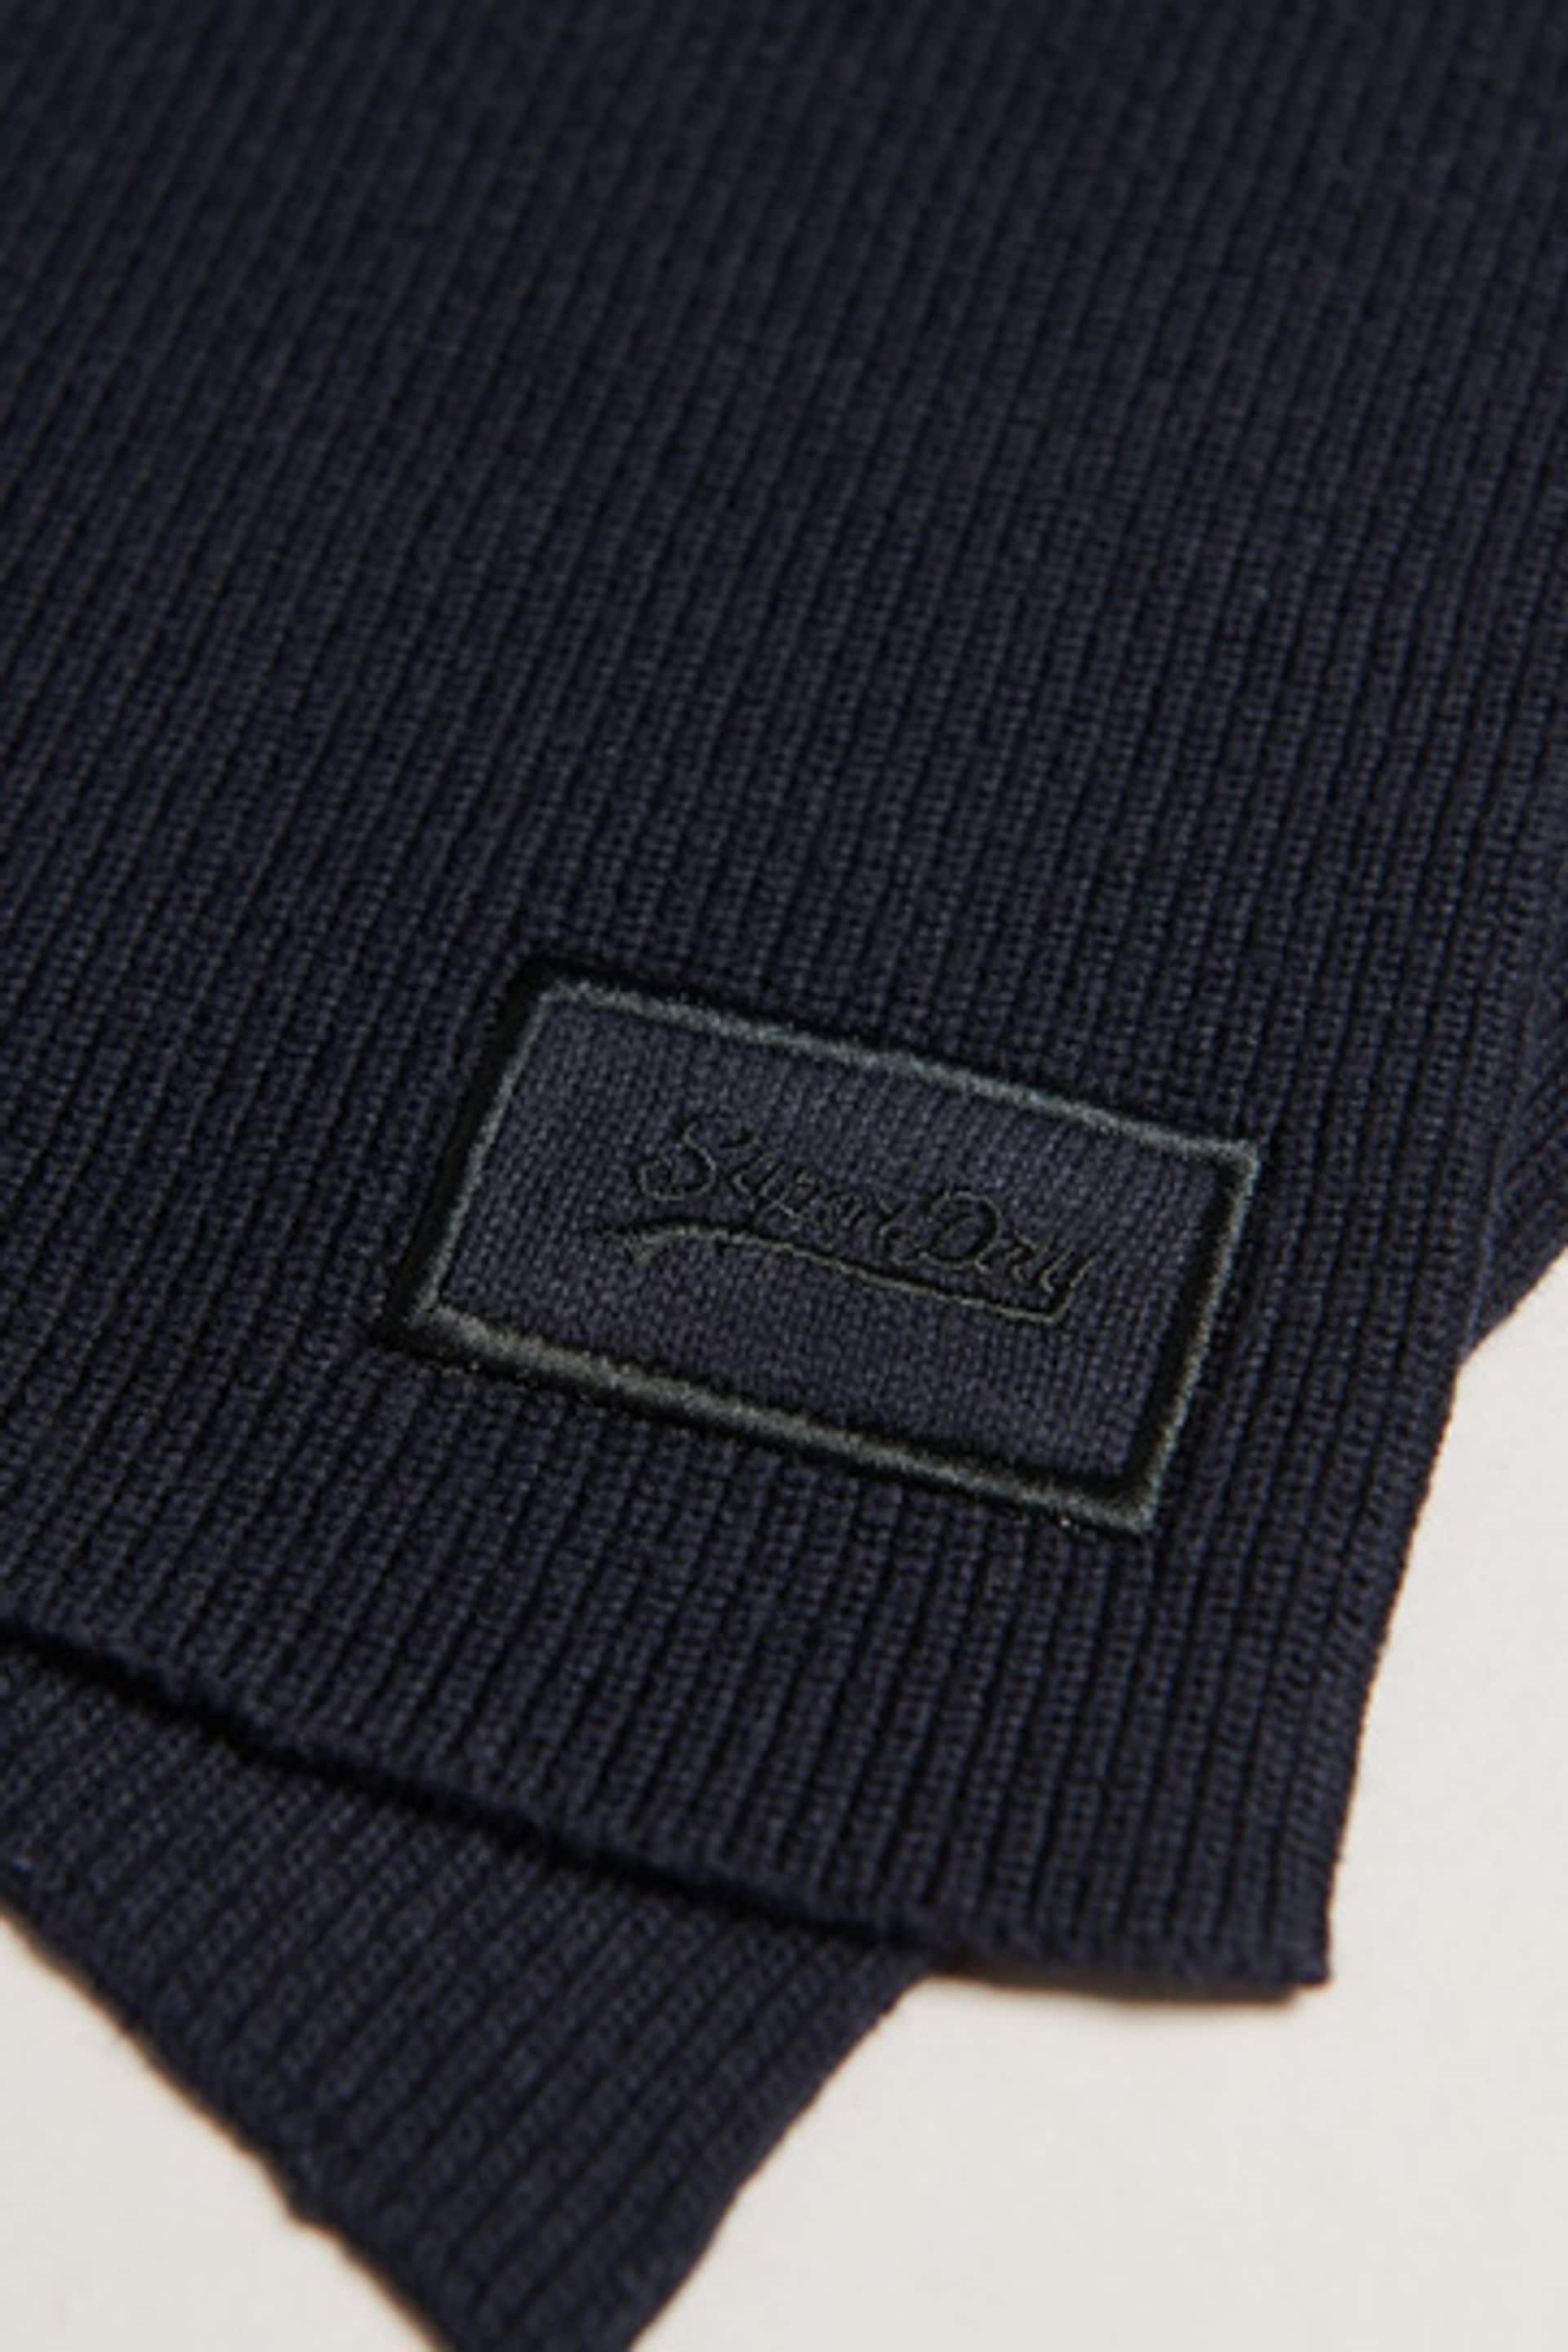 Superdry Blue Knitted Logo Scarf - Image 3 of 3